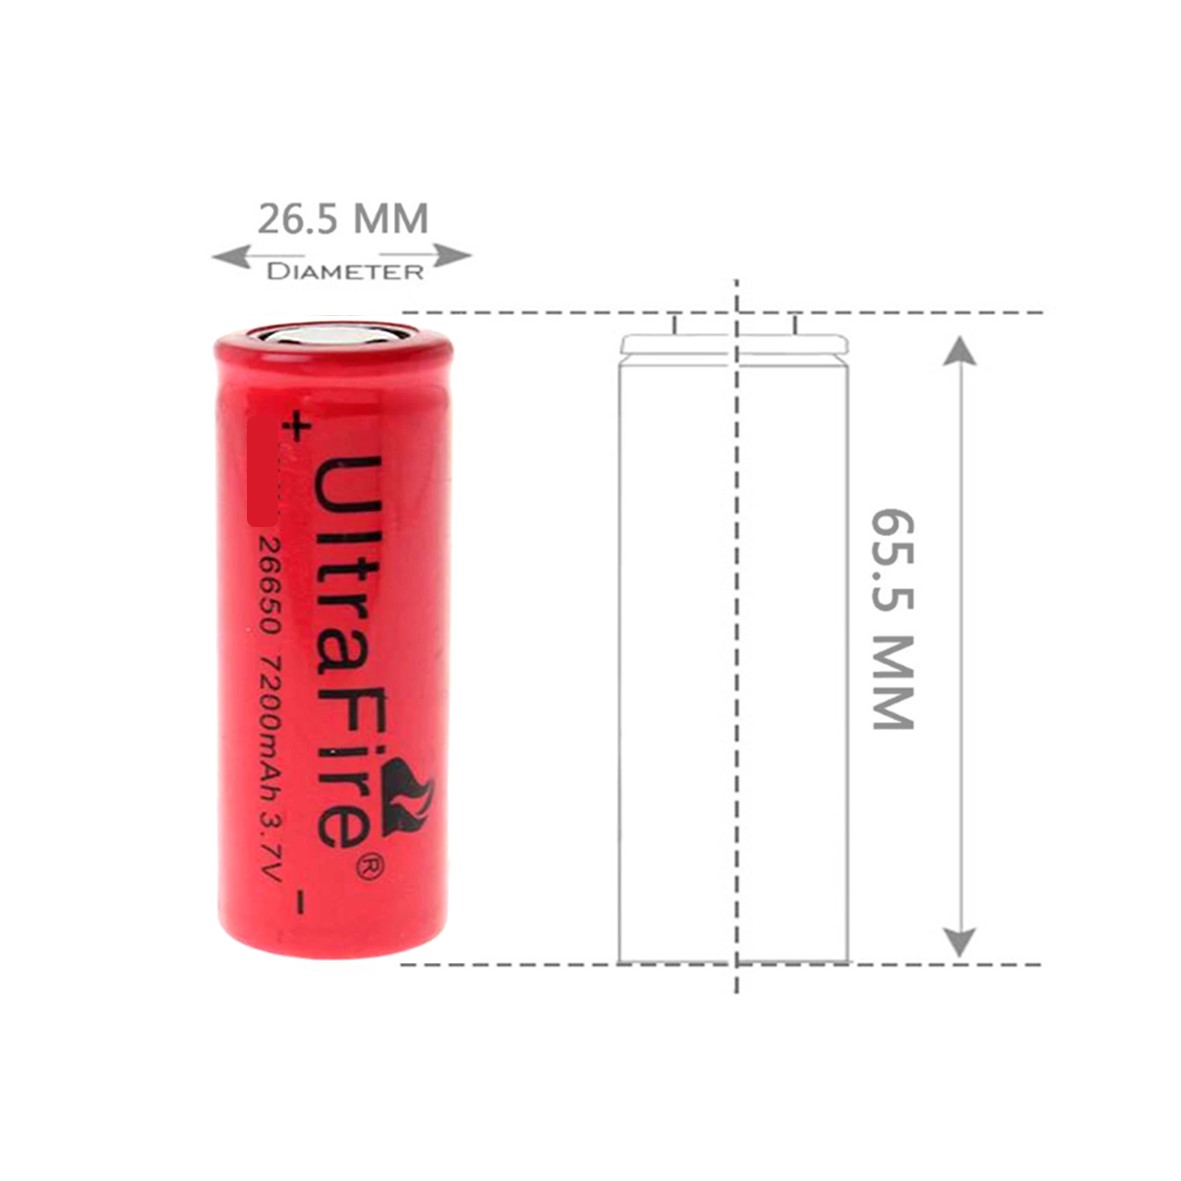 UltraFire 26650 Rechargeable 3.7v Li-Ion Battery Lithium Battery